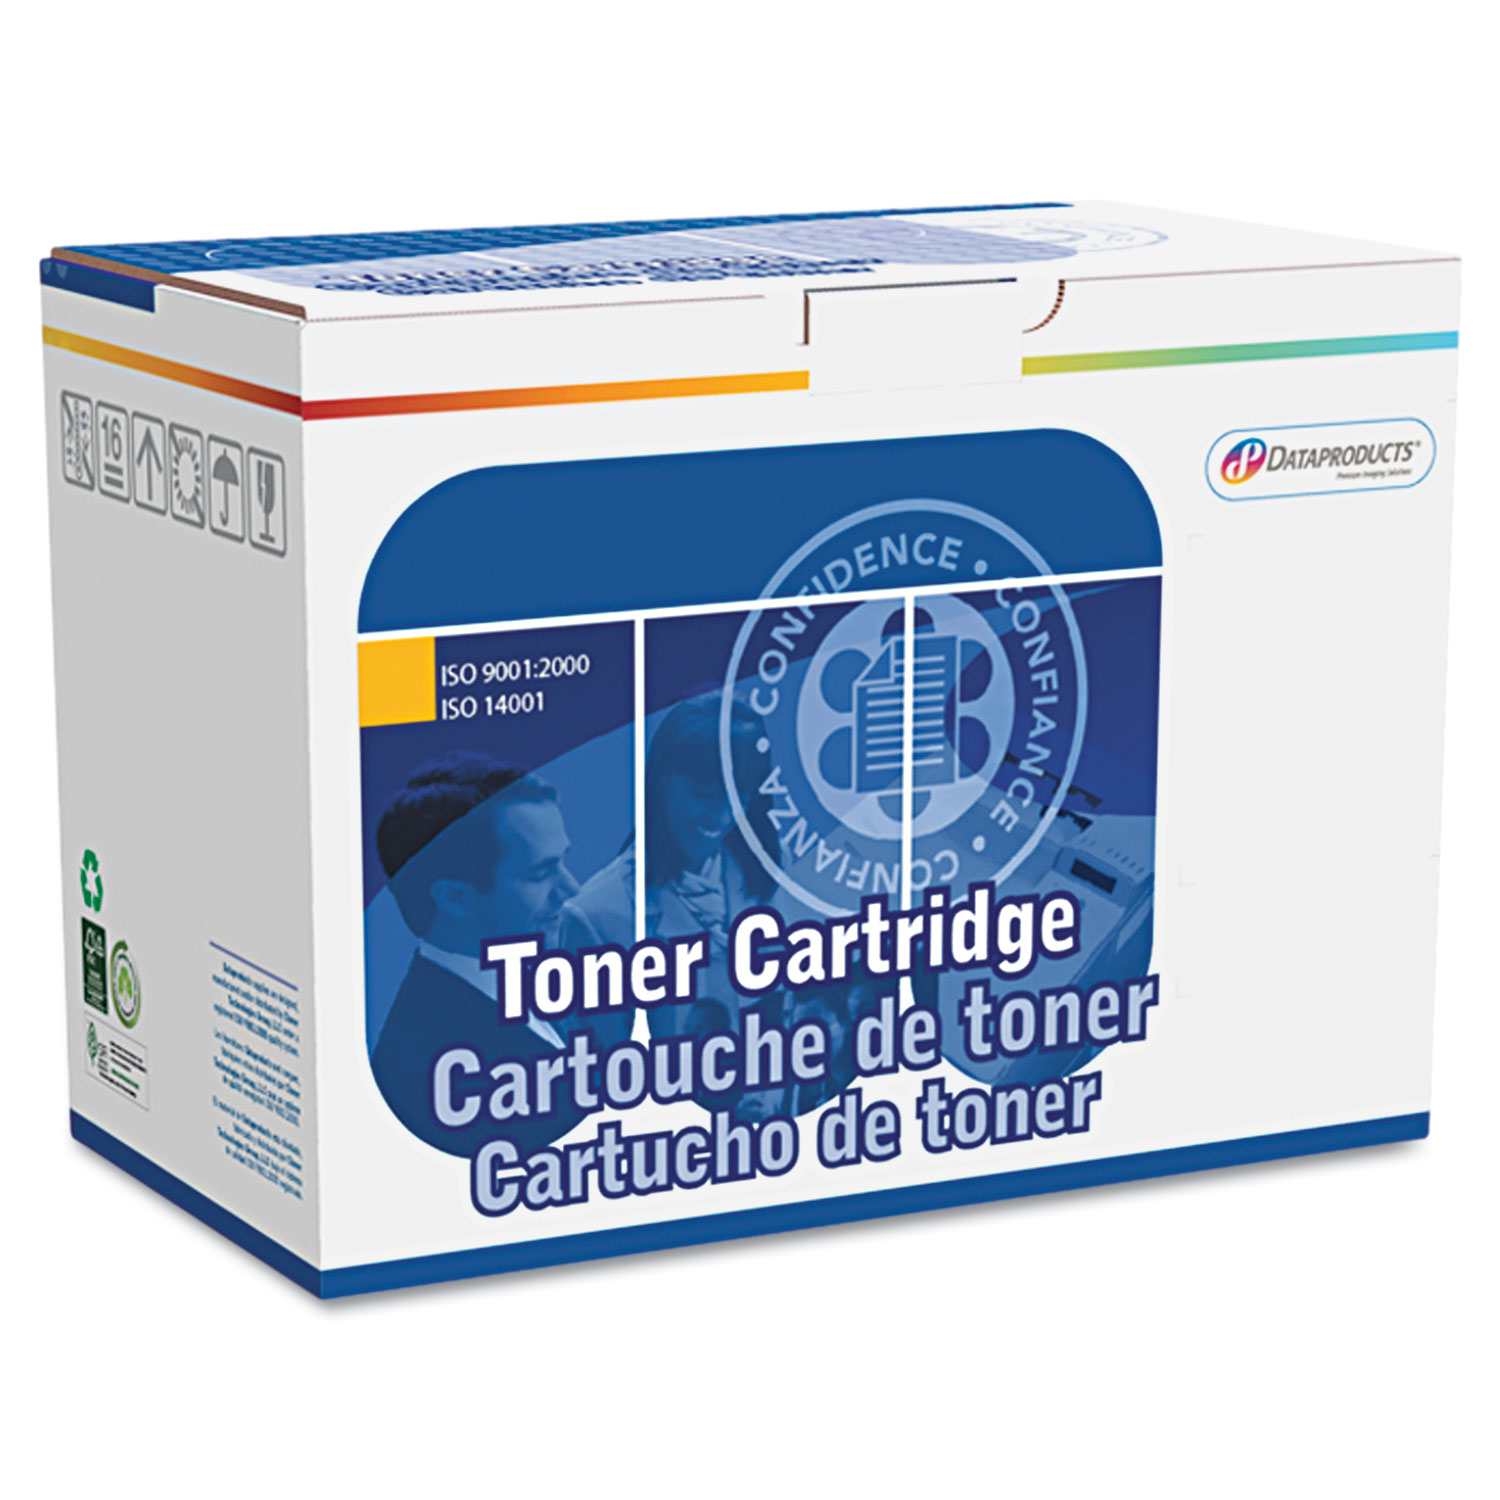 Remanufactured CC531A (304A) Toner, 2,800 Page-Yield, Cyan